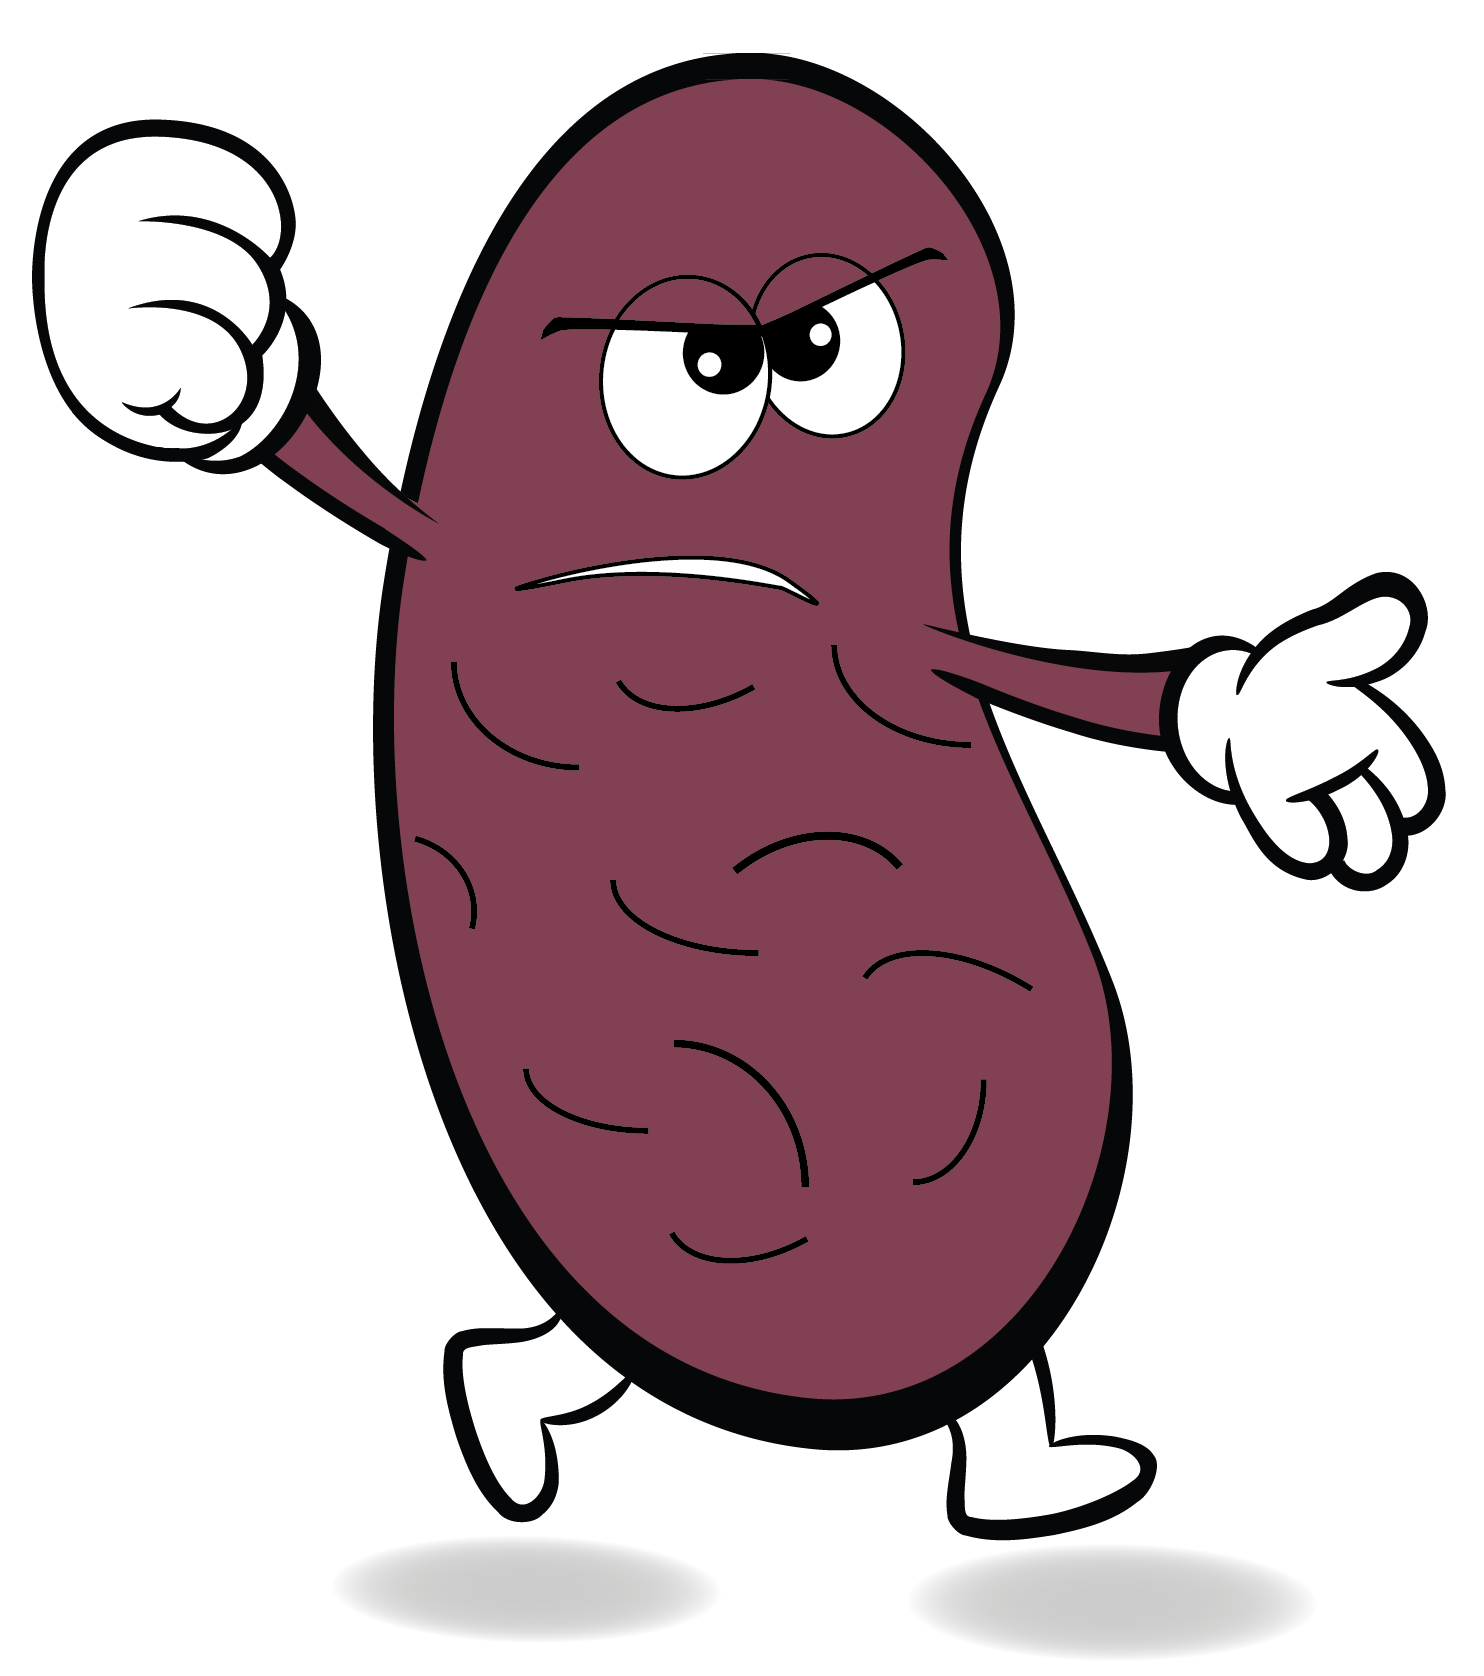 Animated Kidney Clipart - xcdet